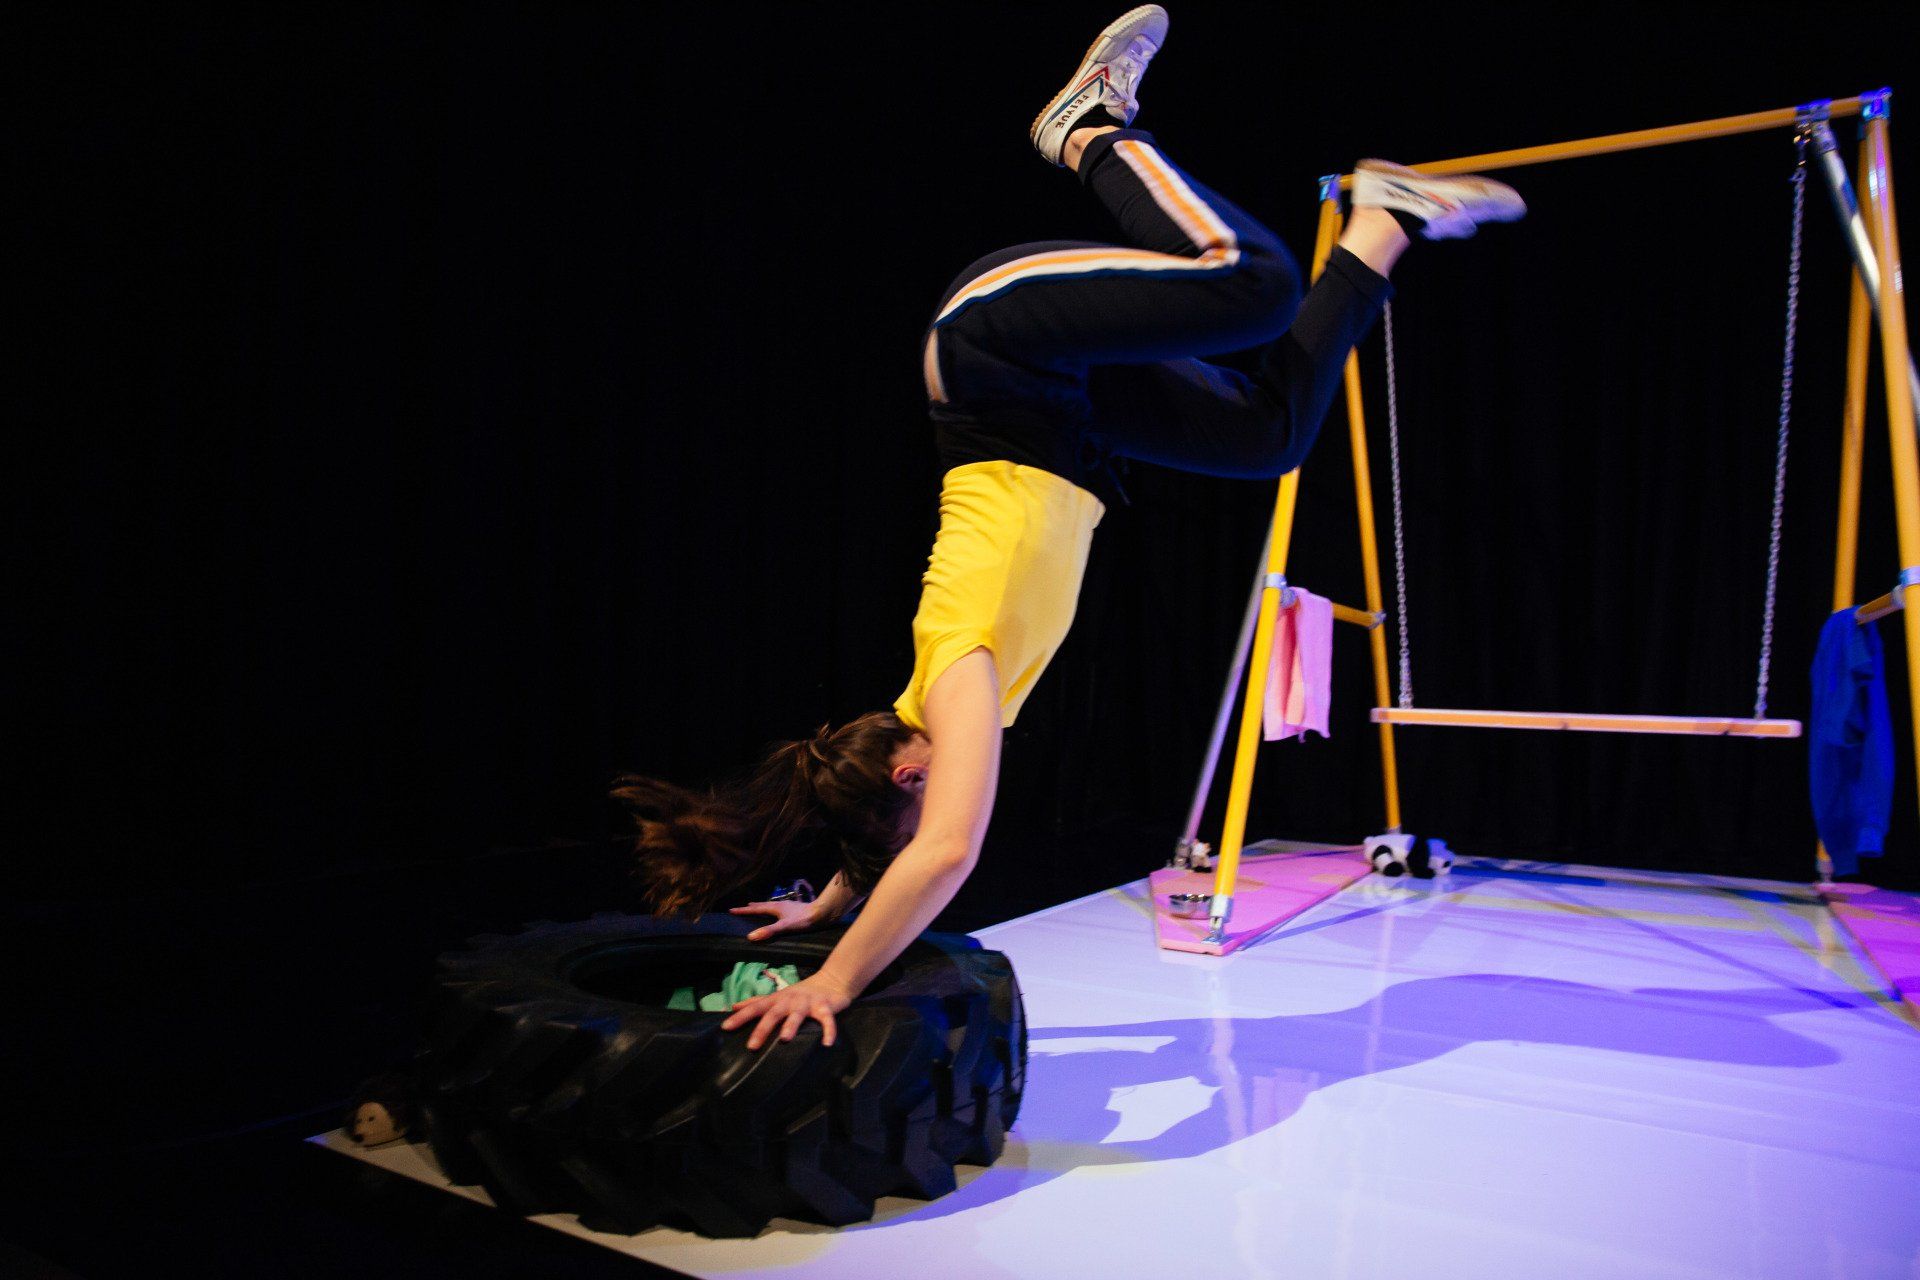 a person is doing a handstand on a tire on a stage .